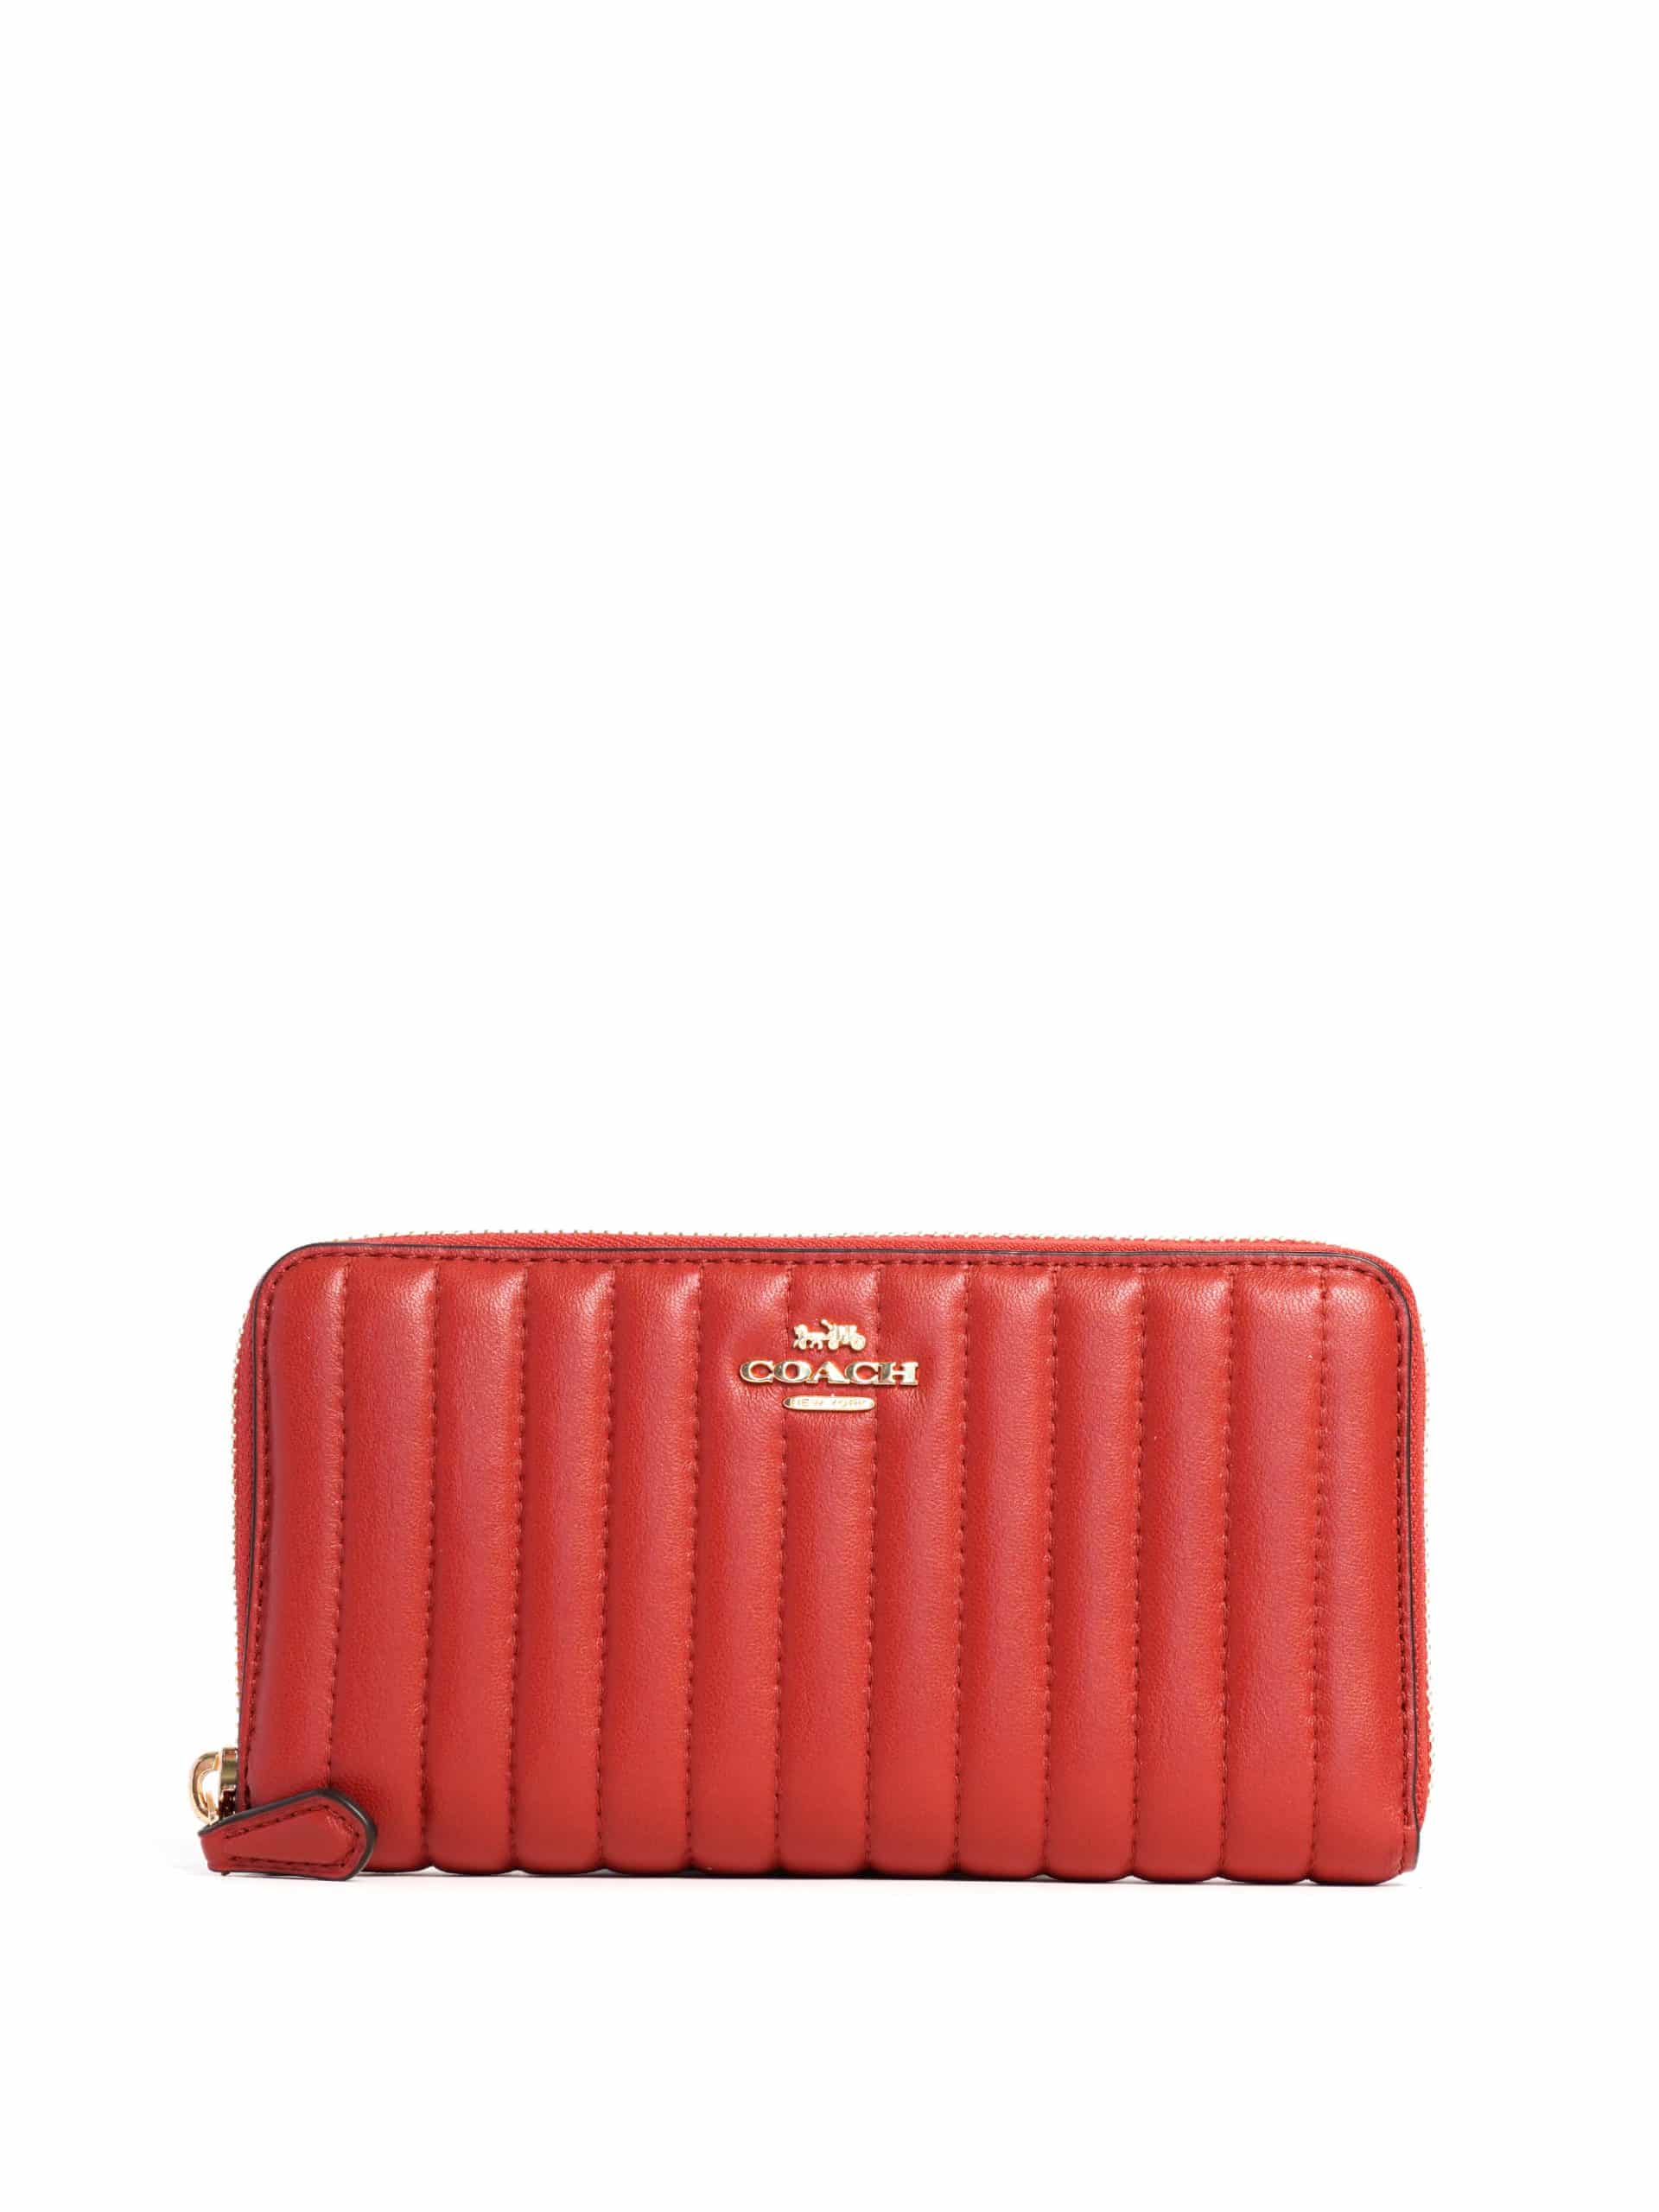 Coach 2855 Accordion Zip Wallet with Linear Quilting - Chalk